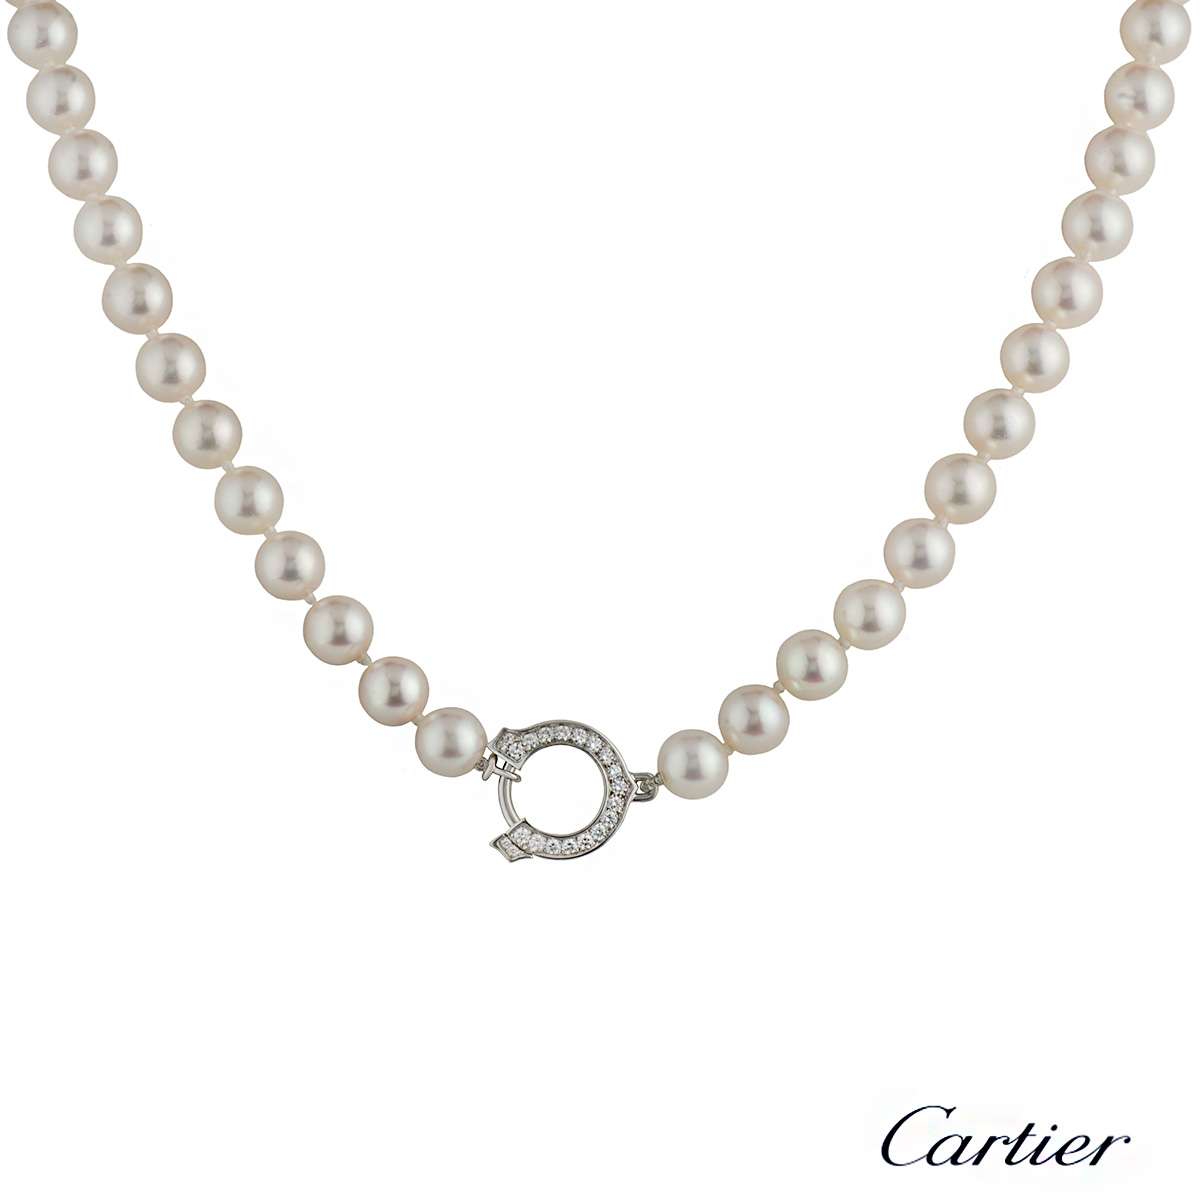 Cartier 18k White Gold Diamond and 